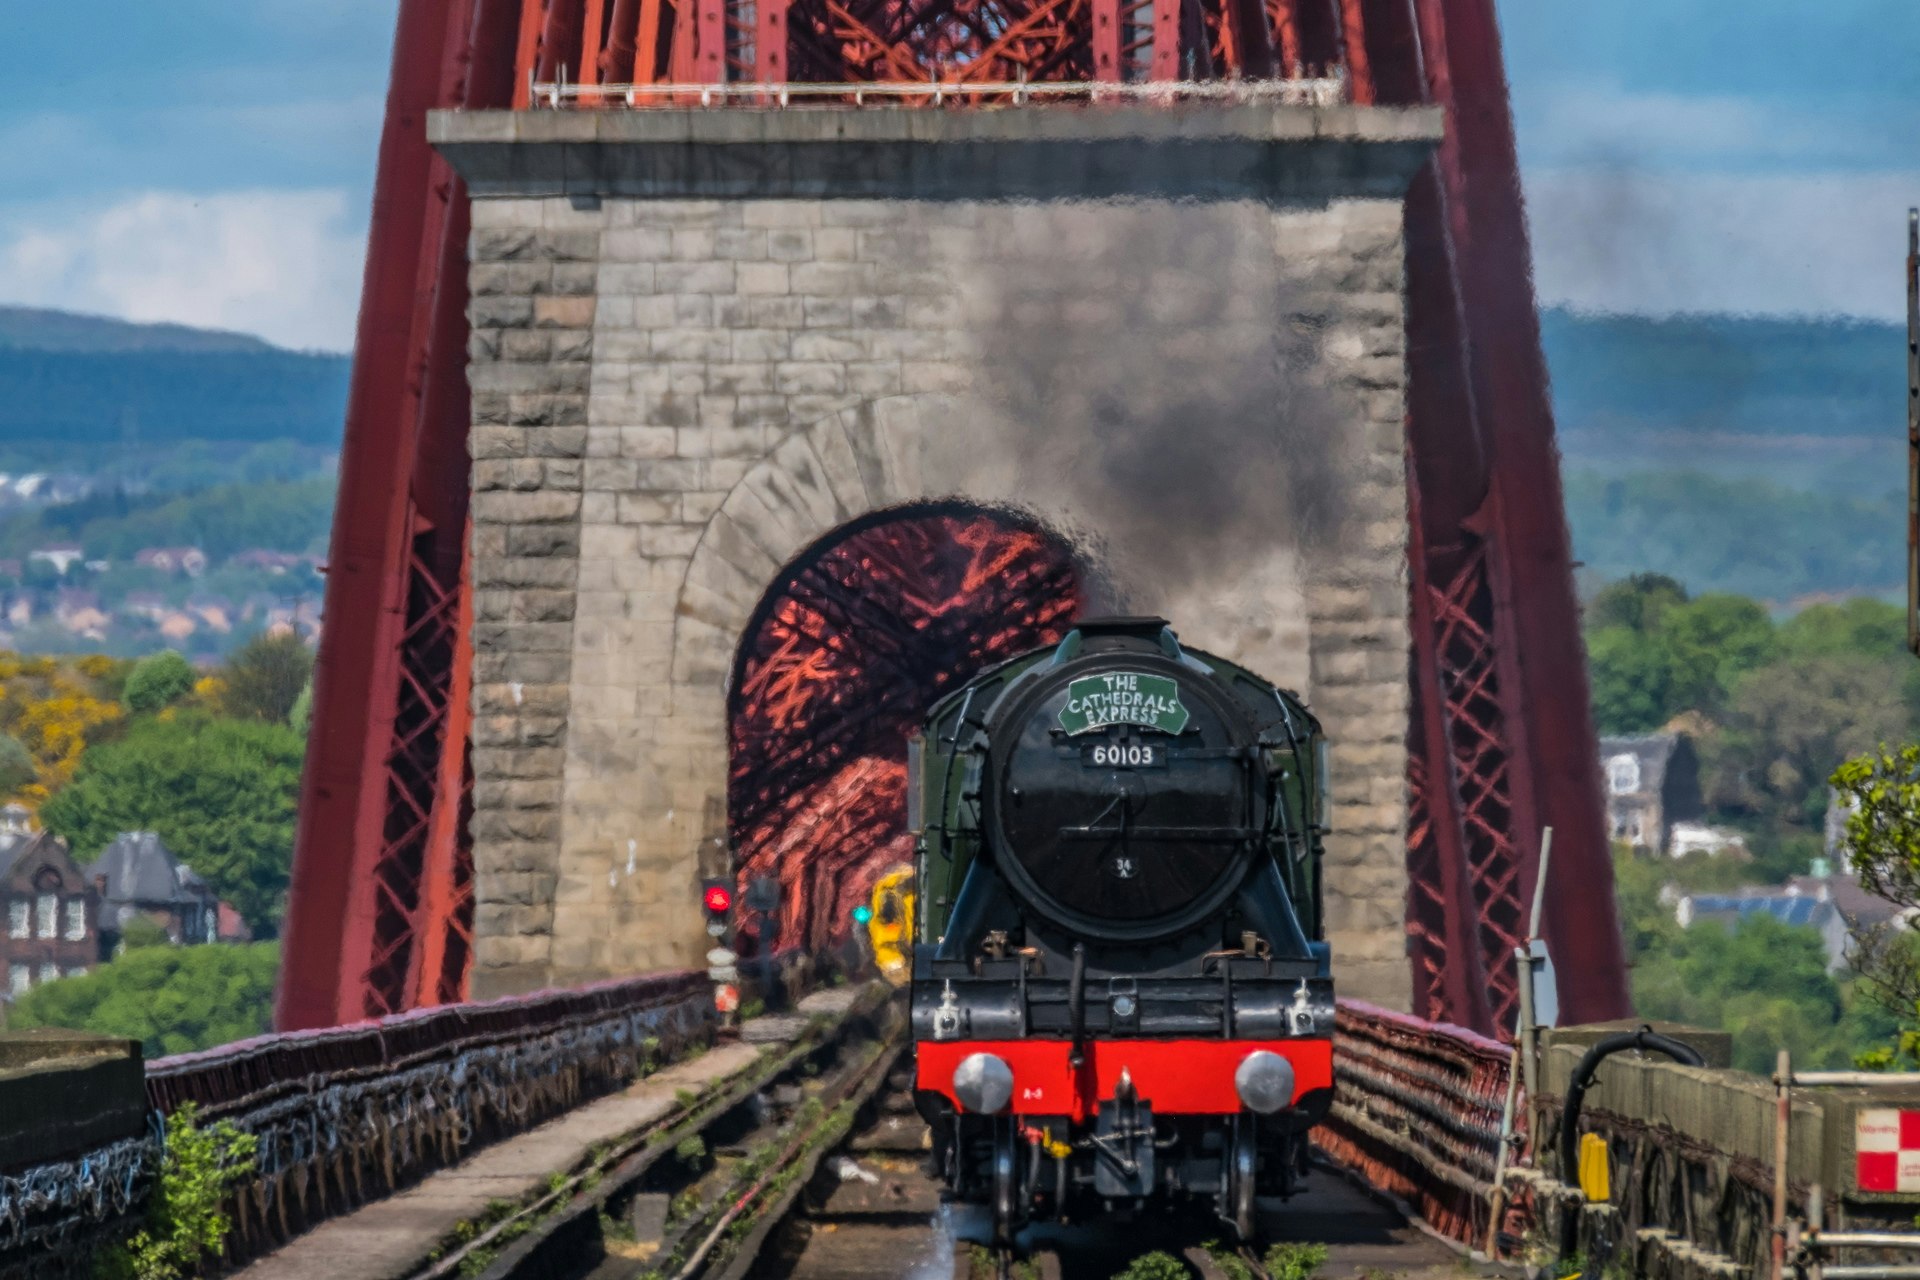 The Flying Scotsman passes over the Forth Rail Bridge to South Queens Ferry.